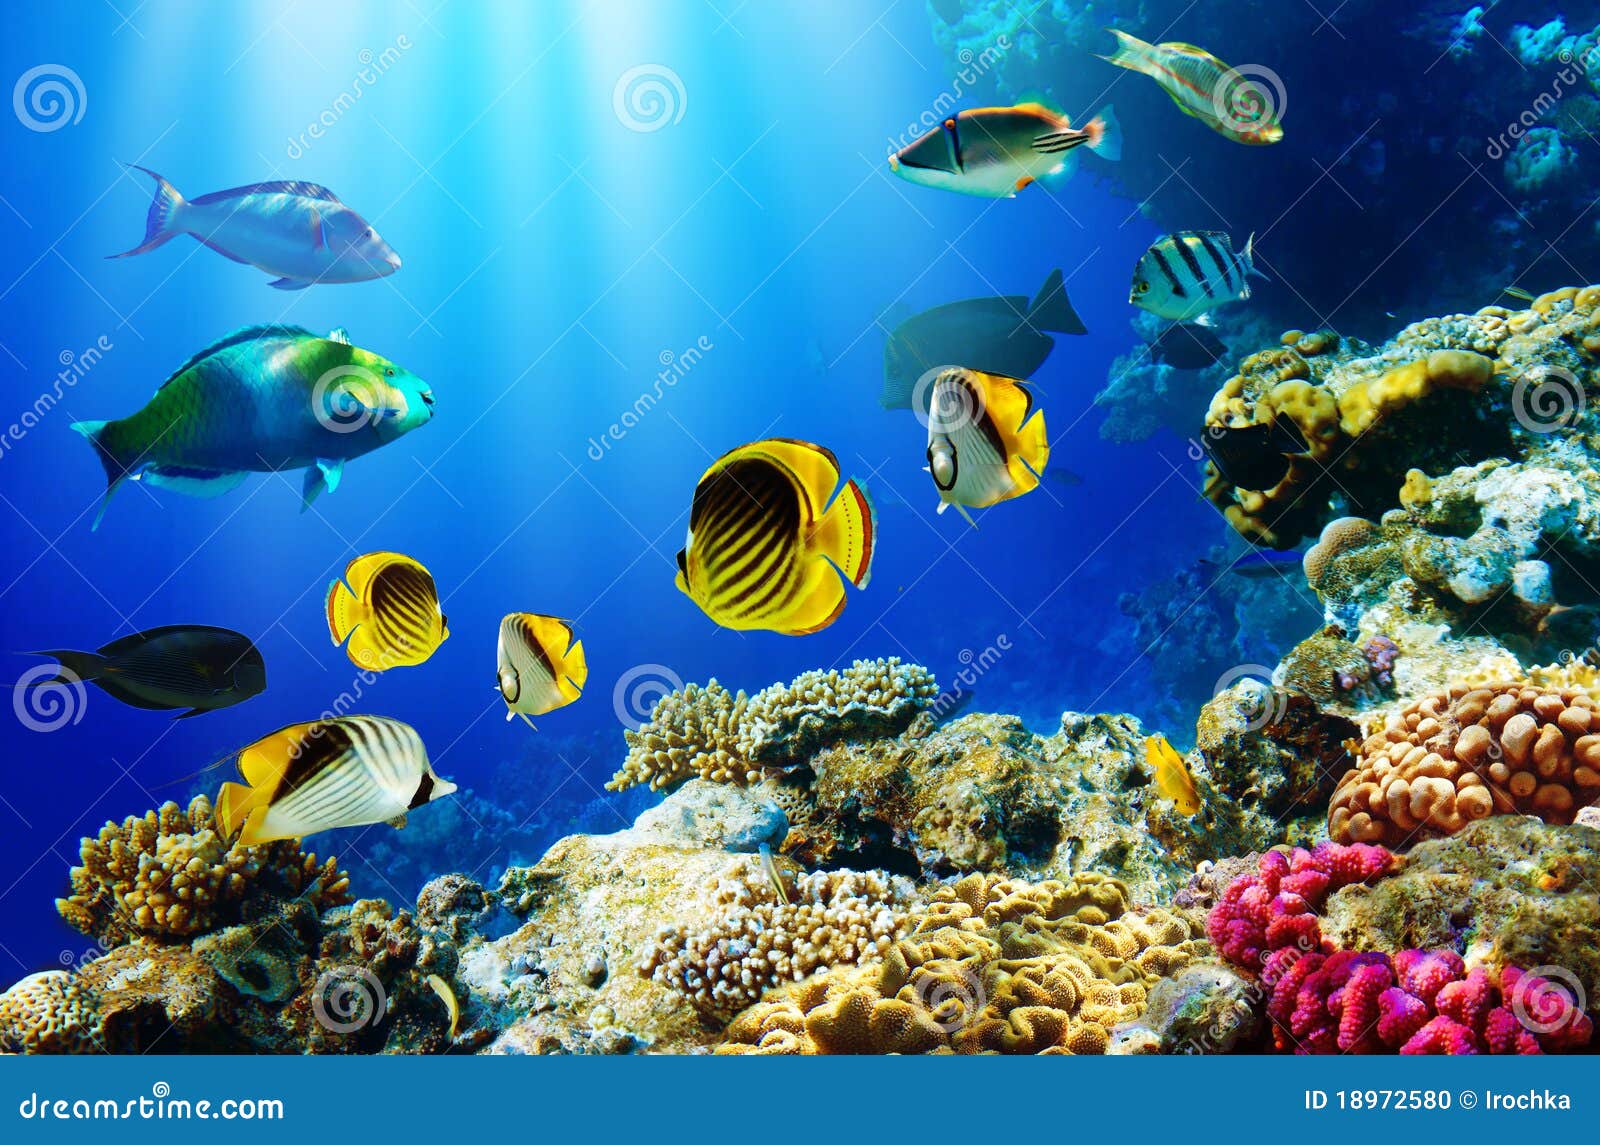 tropical fish over coral reef